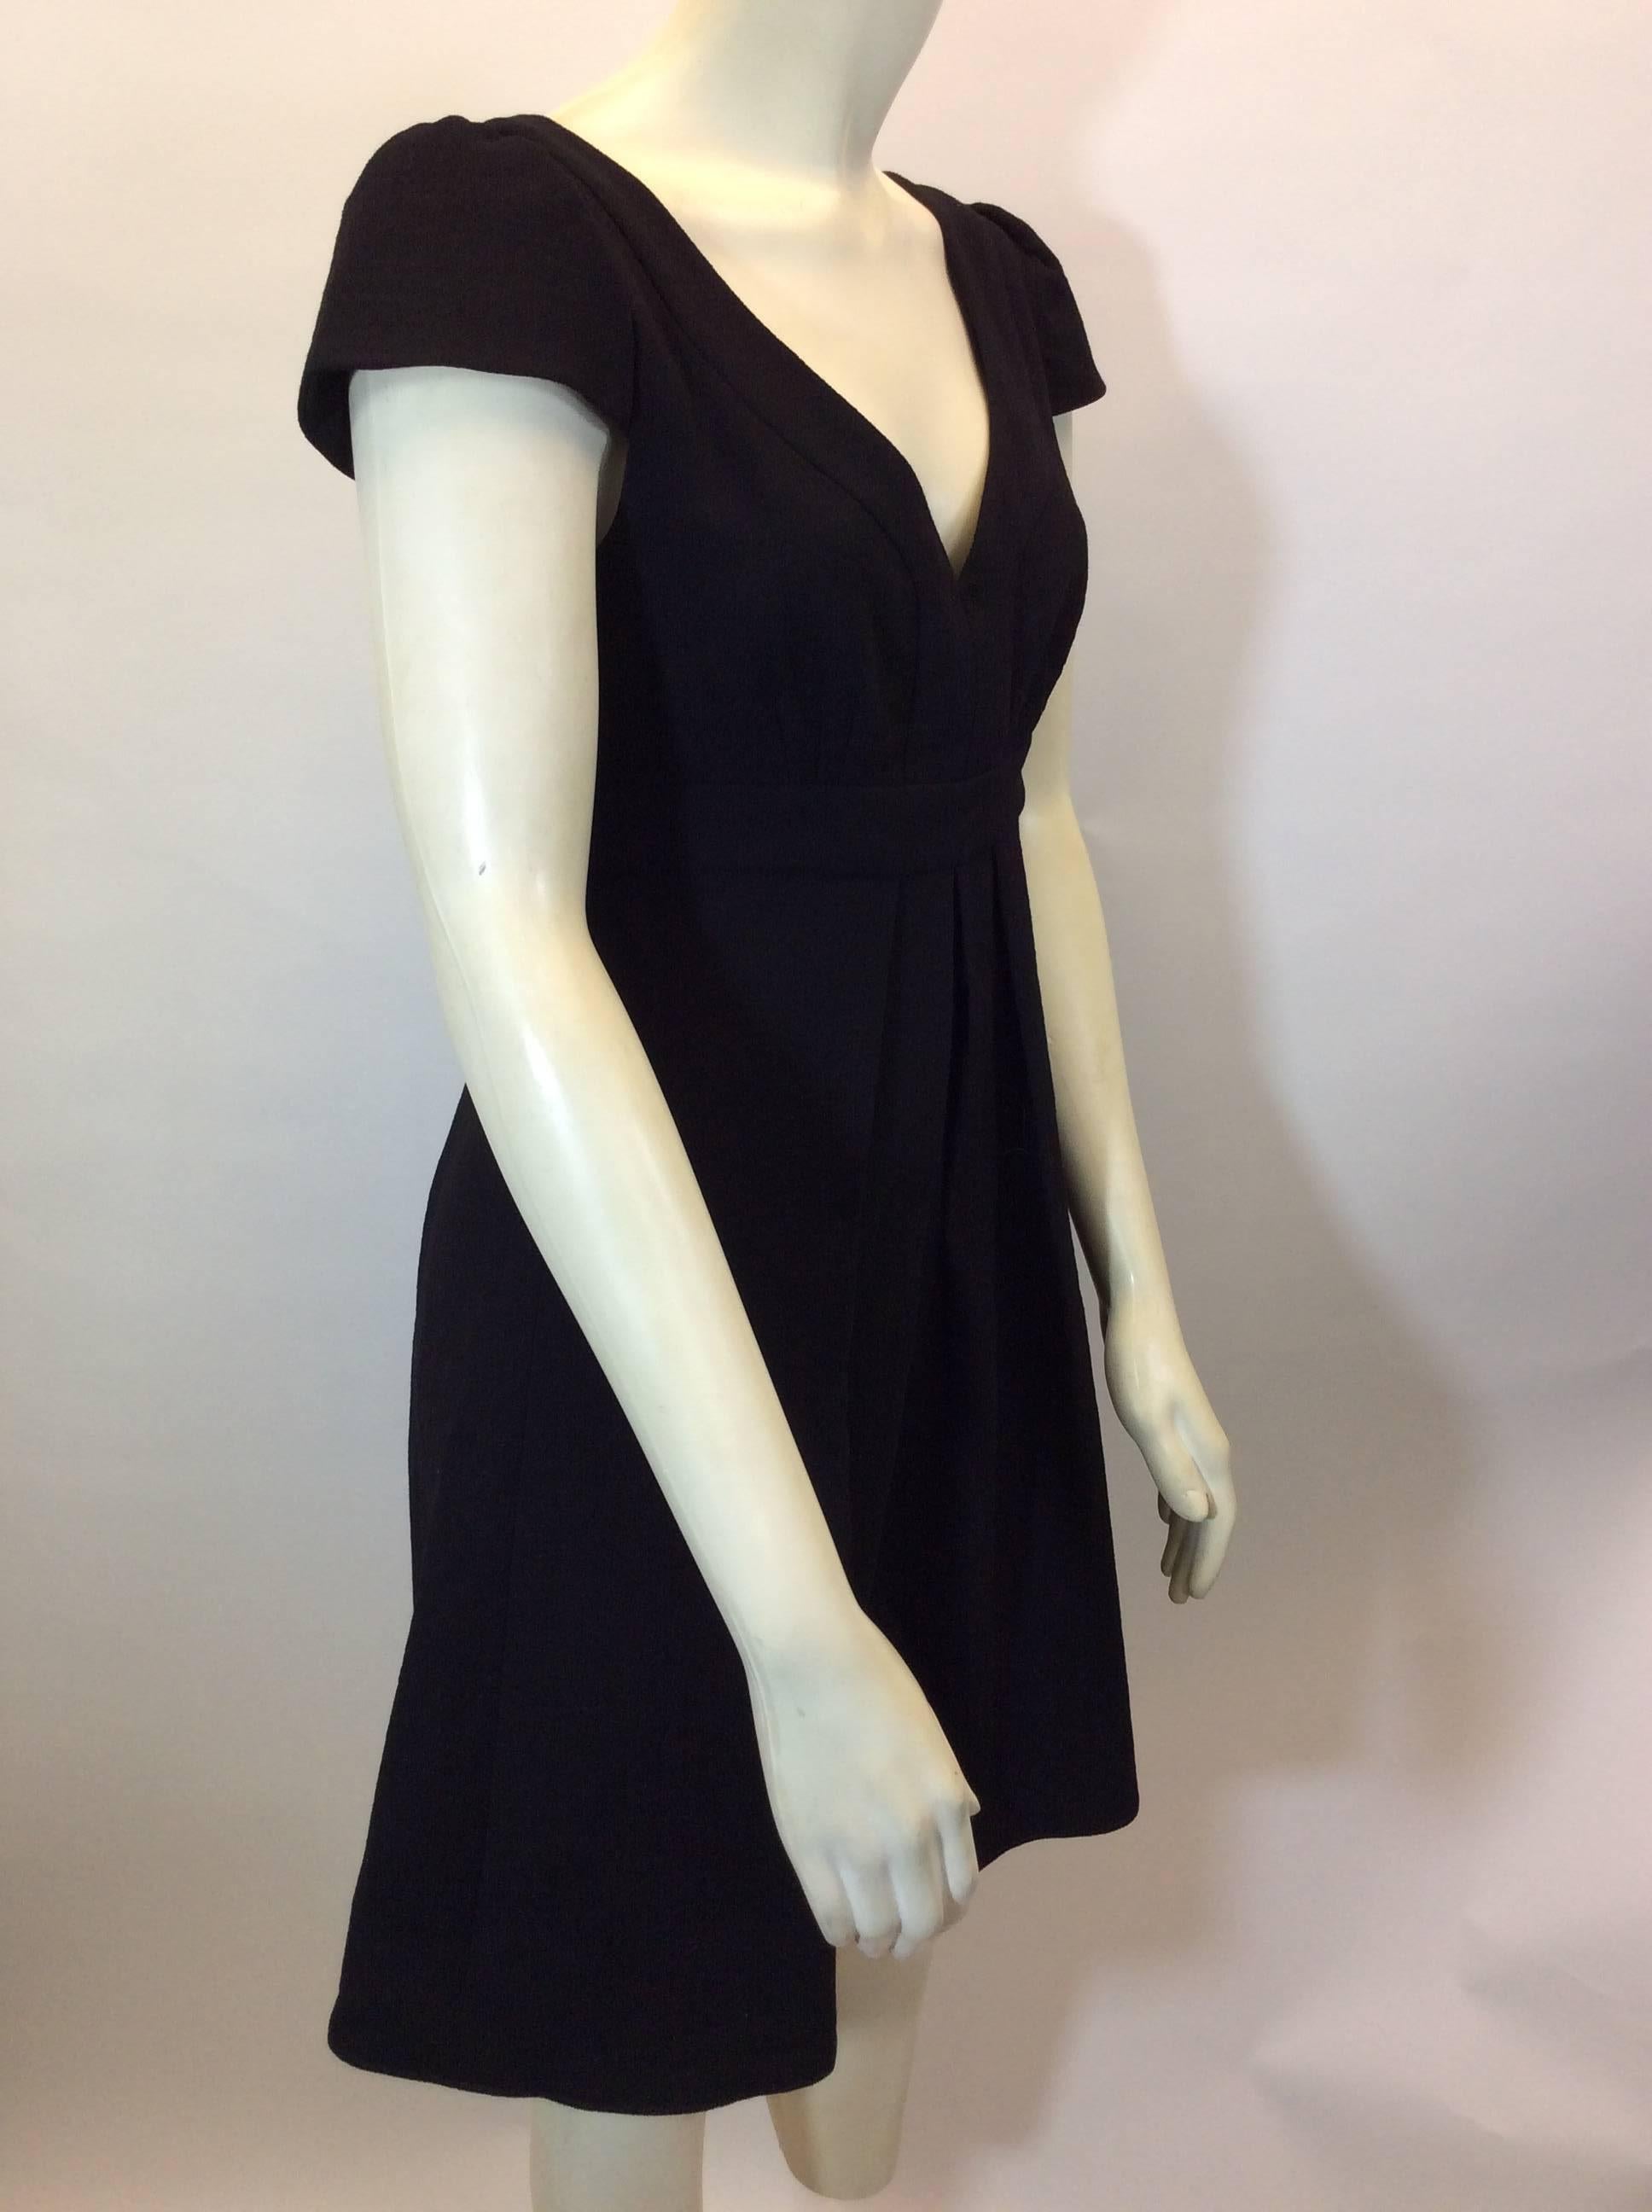 Black Pleated Cocktail Dress
Center back zipper closure
Cap sleeves
Pleated empire waist detail
Size 4
100% Wool shell, 100% Polyester lining